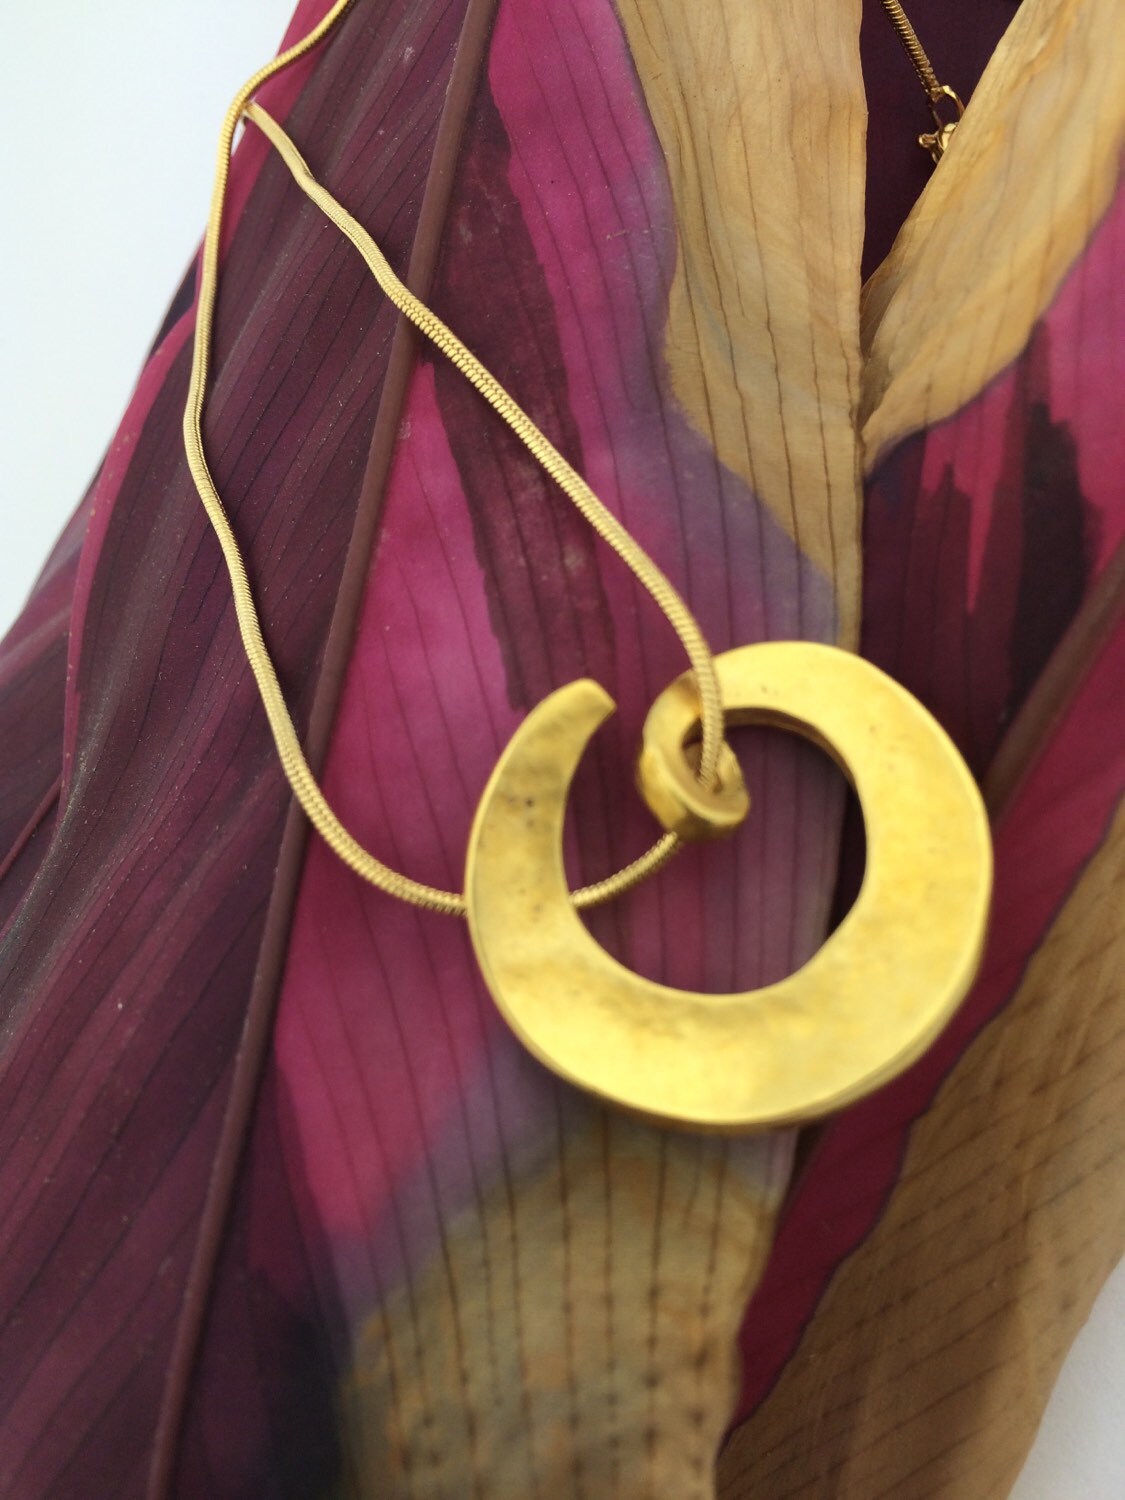 Gold-plated swirl pendant necklace by StefansJewelry on Etsy